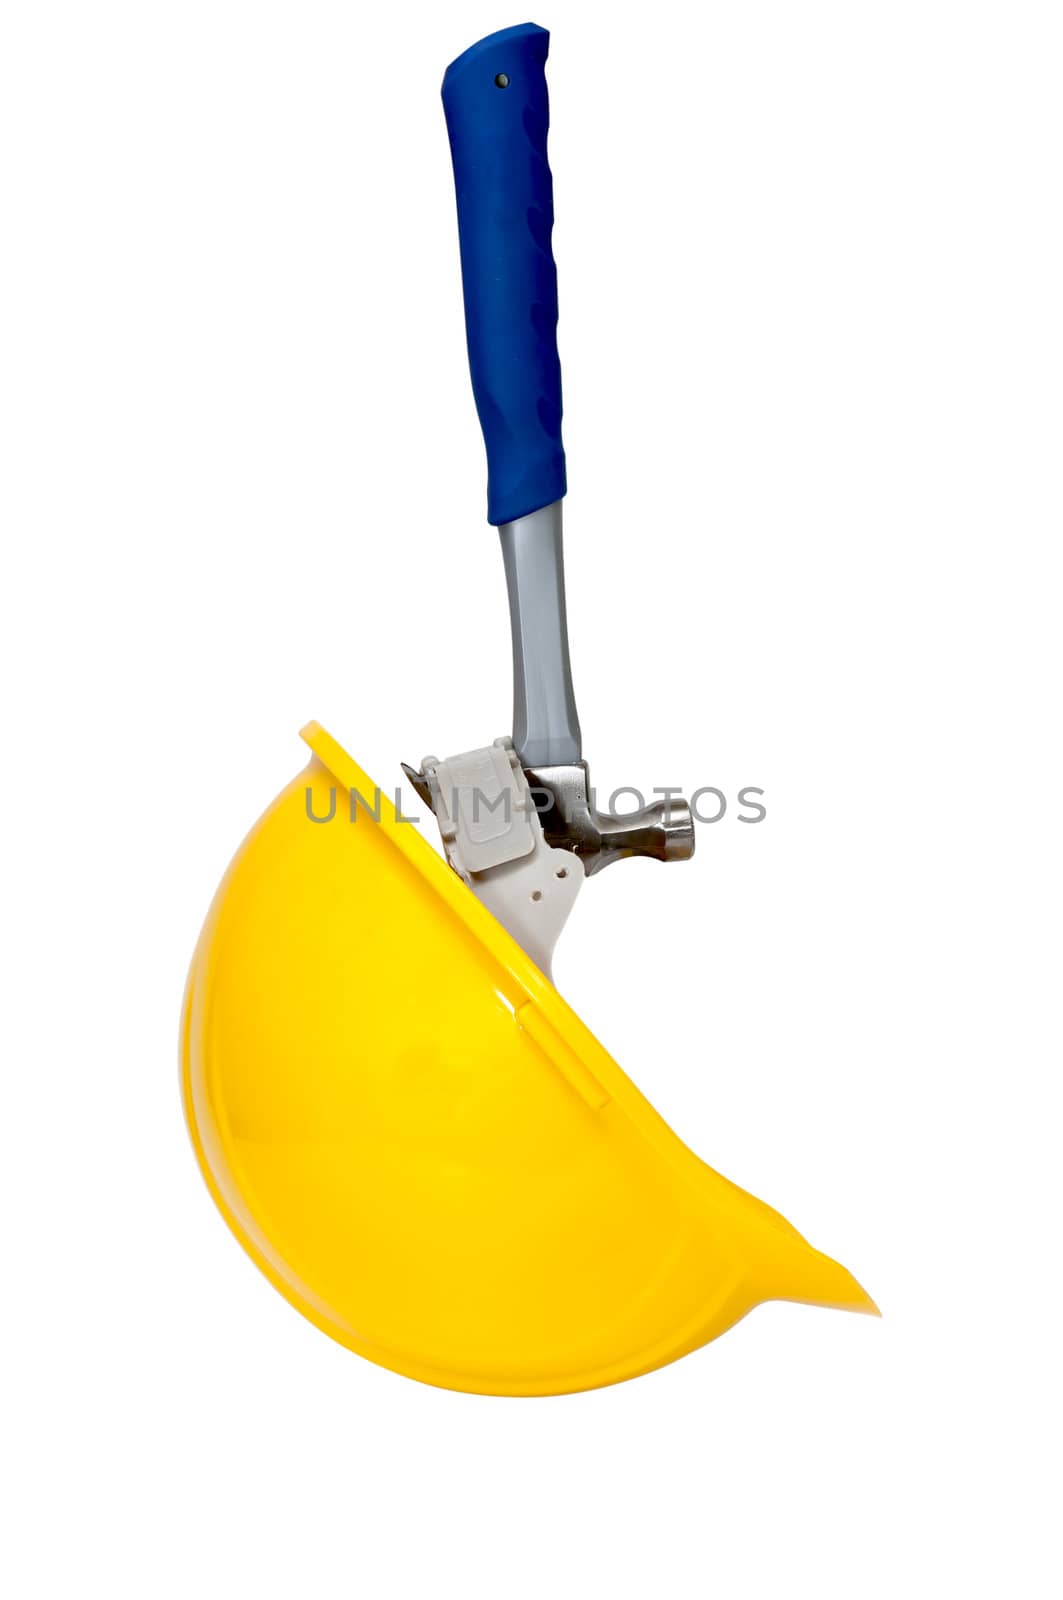 Hardhat and hammer isolated on white background with clipping path.